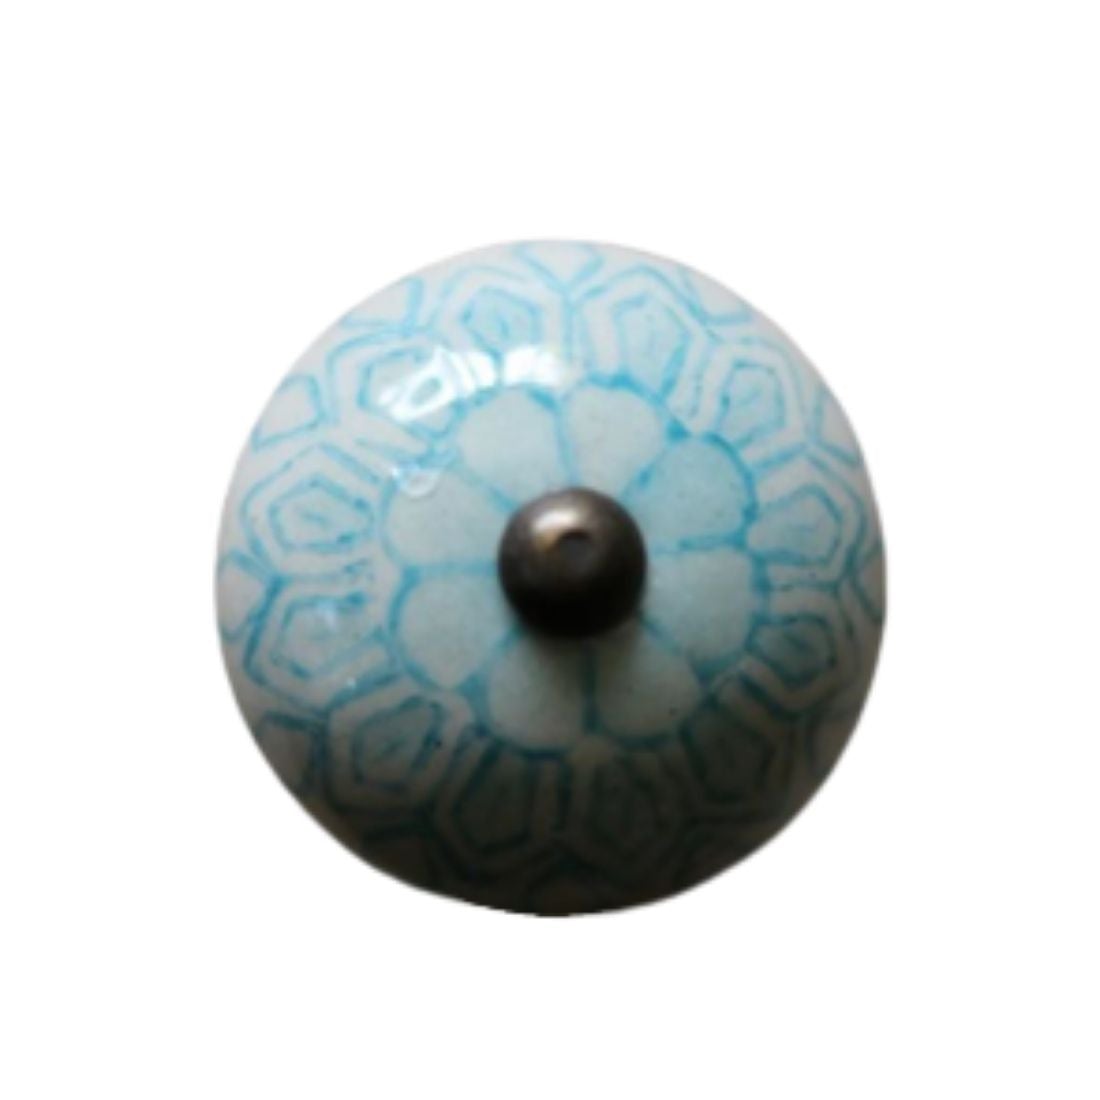 Knob - Teal and White Flower Pattern